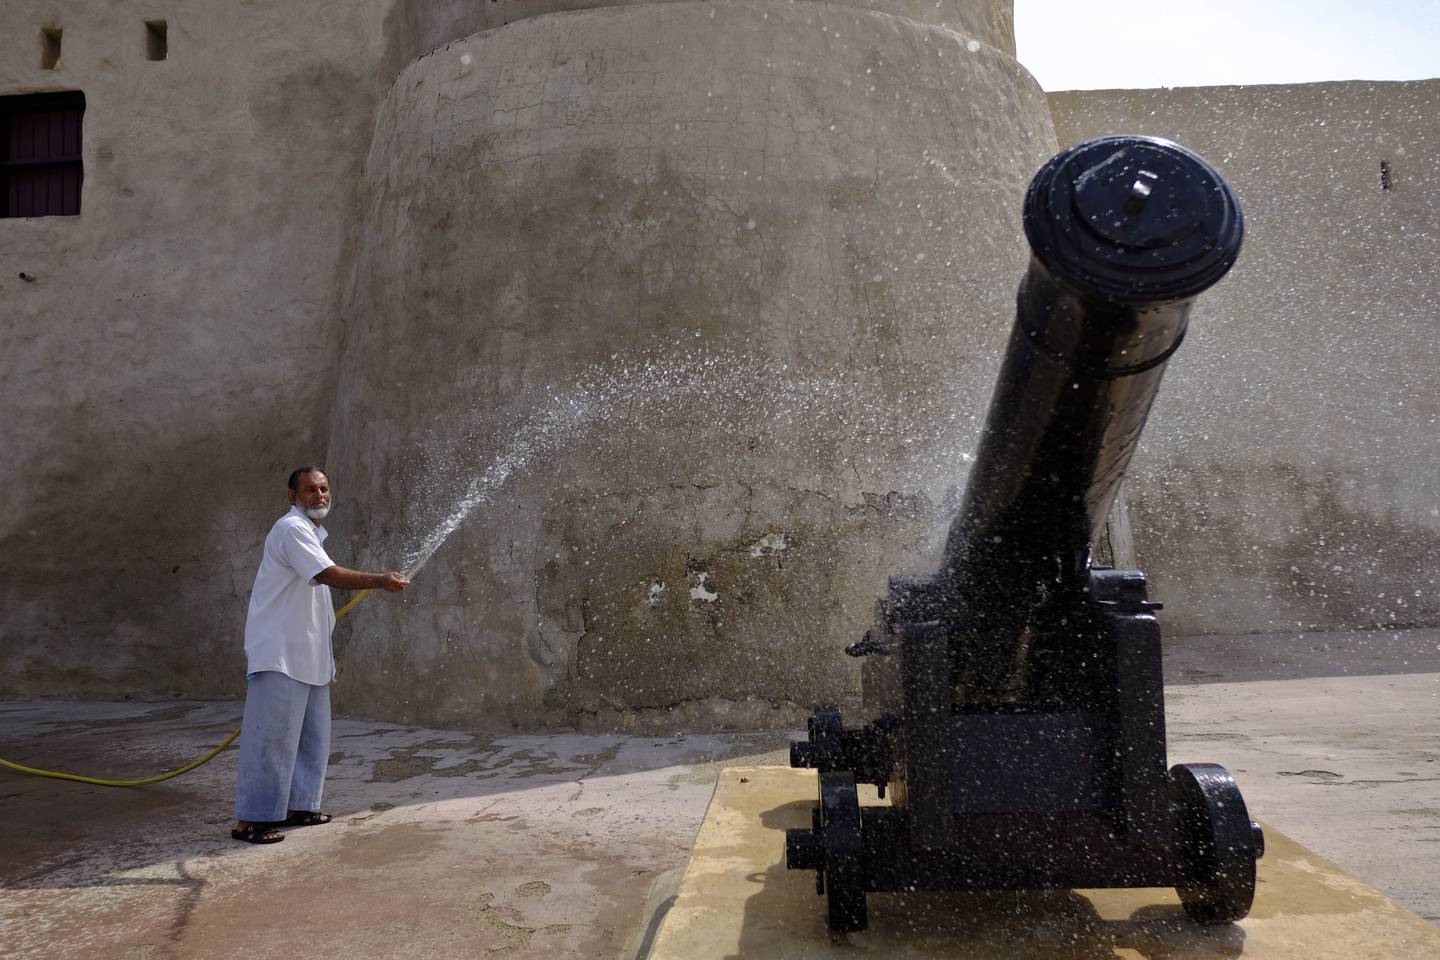 UMM AL QUWAIN, UNITED ARAB EMIRATES, MARCH 10, 2014. Mohammed Nazeen (Bangladesh) washes dust from the canon being display at the Umm Al Quwain Museum. The fort which dates back to 1768 , and was originally used as the Emiri's residence, was fully restored and opened to the public in 2000. (Photo: Antonie Robertson/The National) Journalist: Jen Bell. Section: Northern Coverage POSSIBLE FOCAL POINT